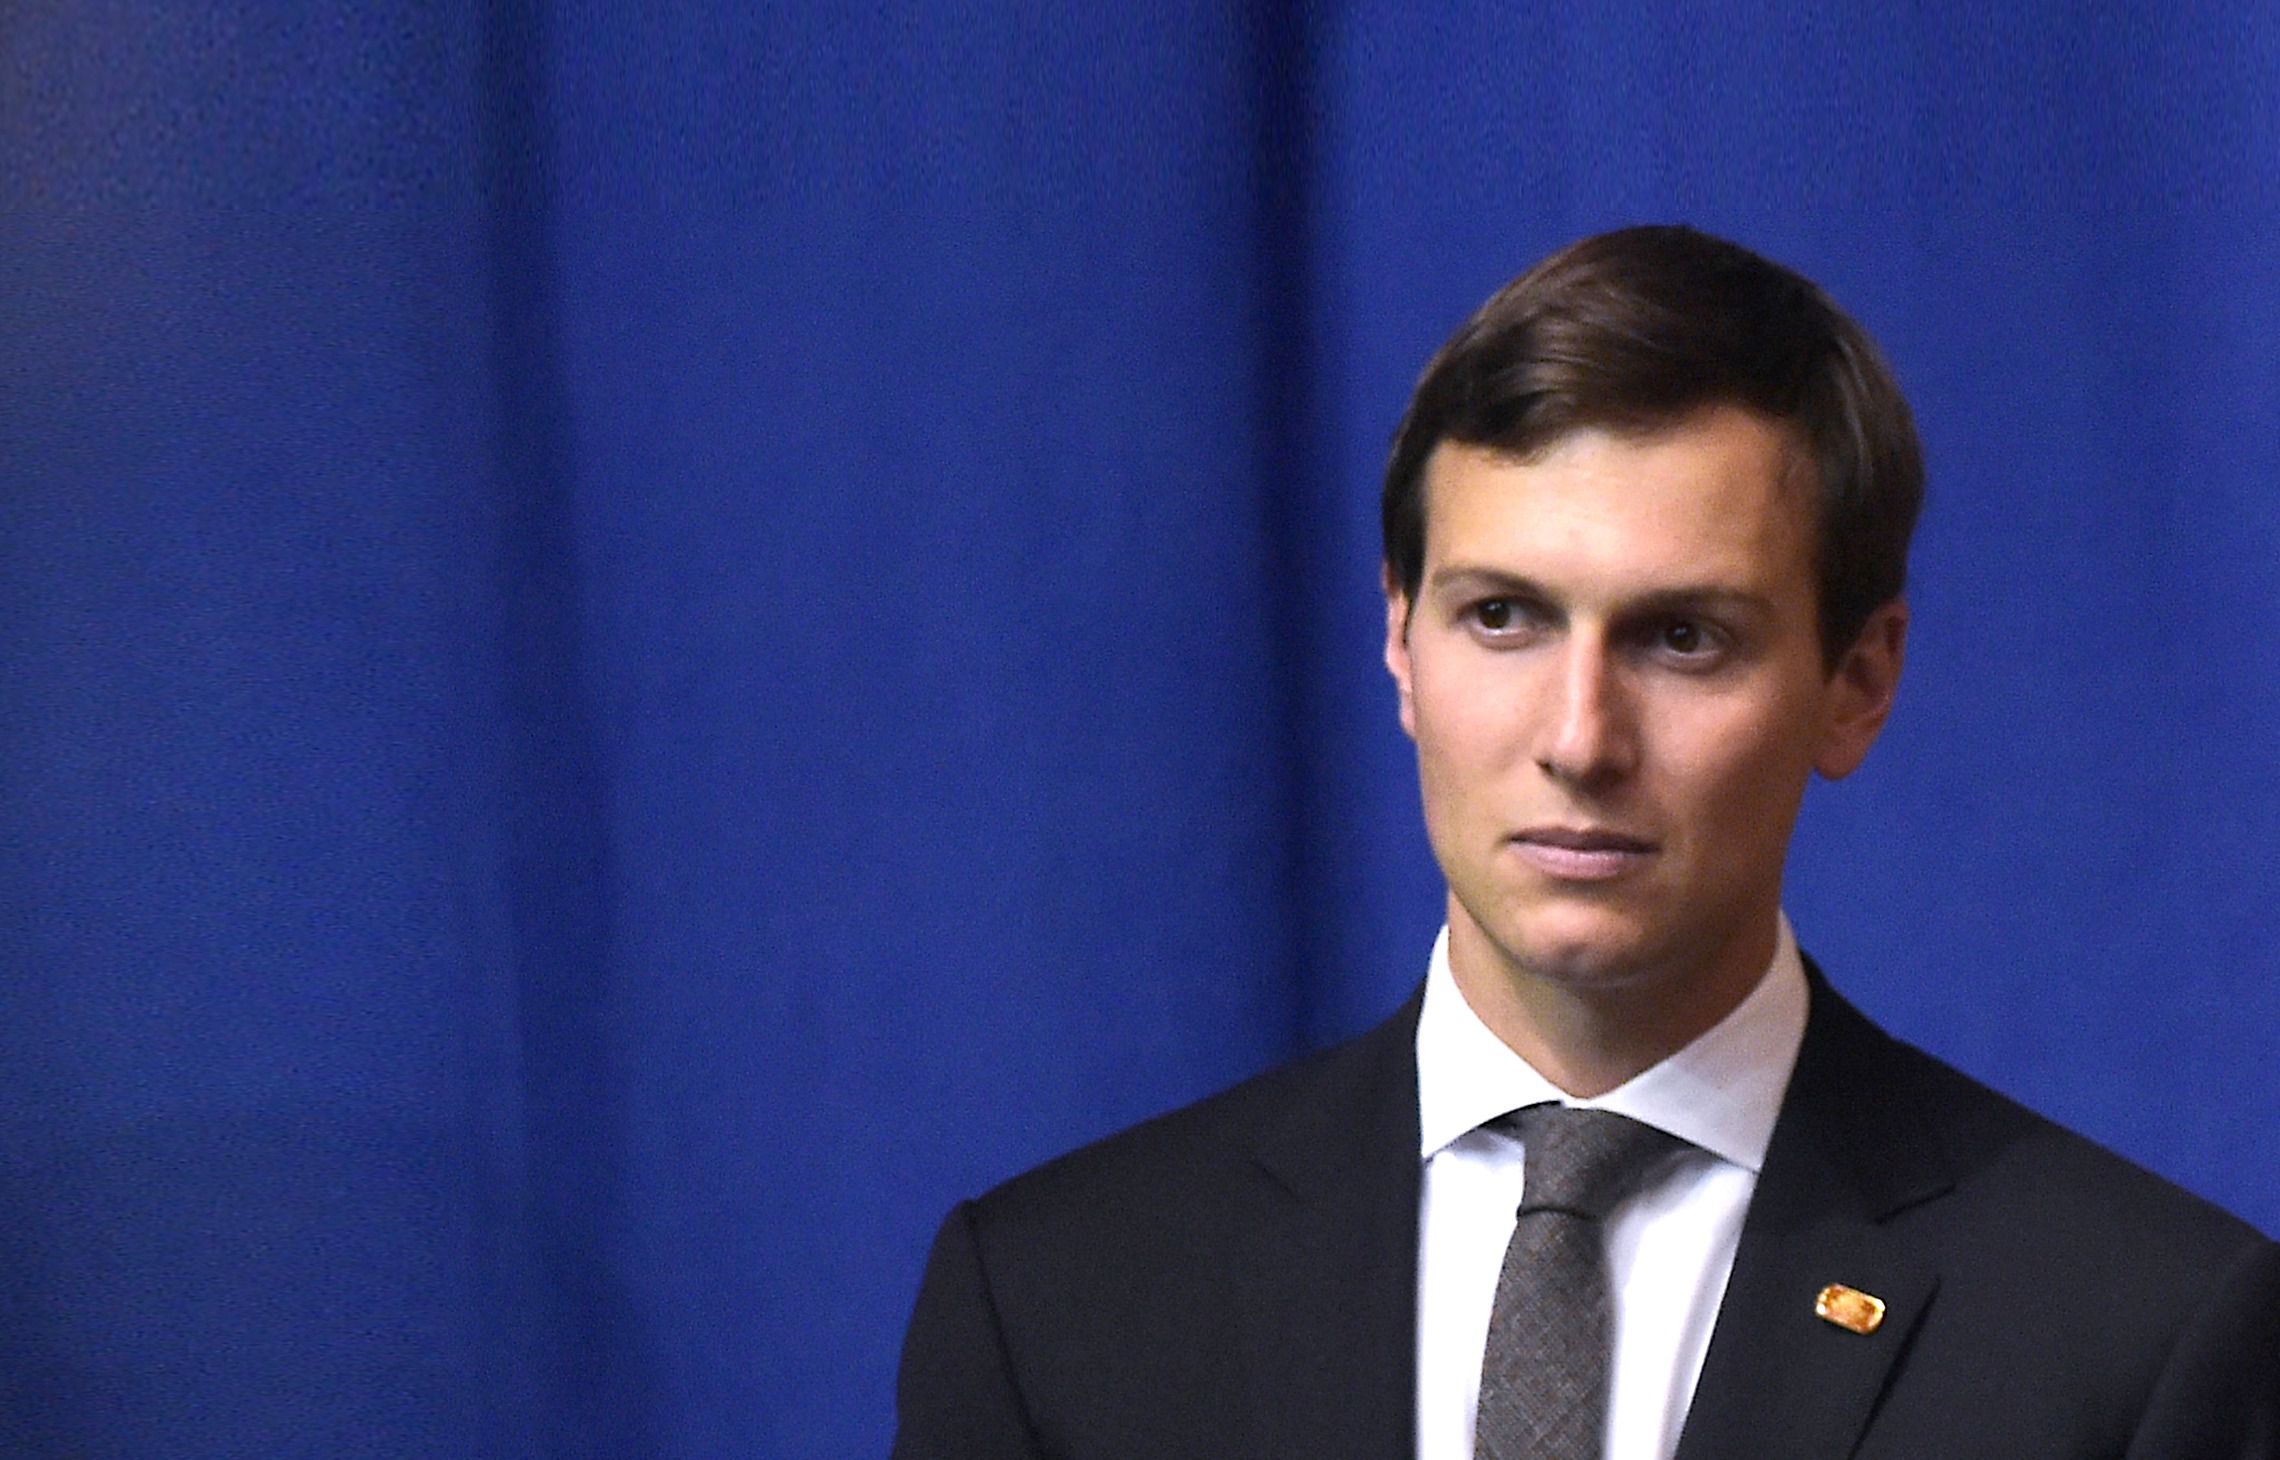 Trump's son-in-law faces Capitol Hill grilling over Russia contacts